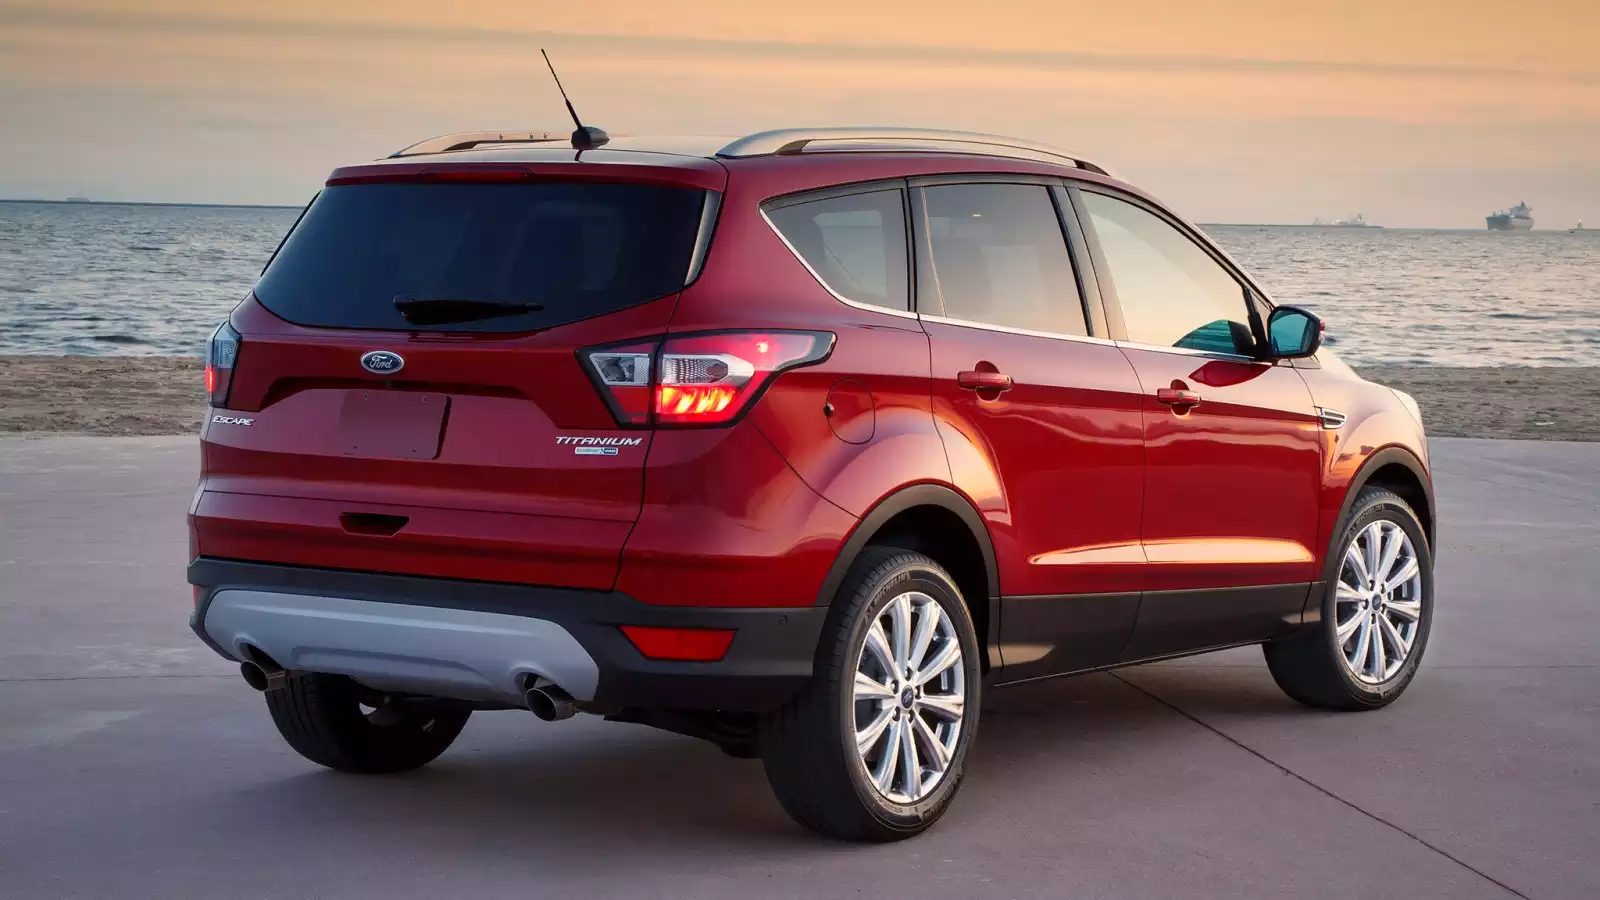 Giá xe Ford Escape 2018